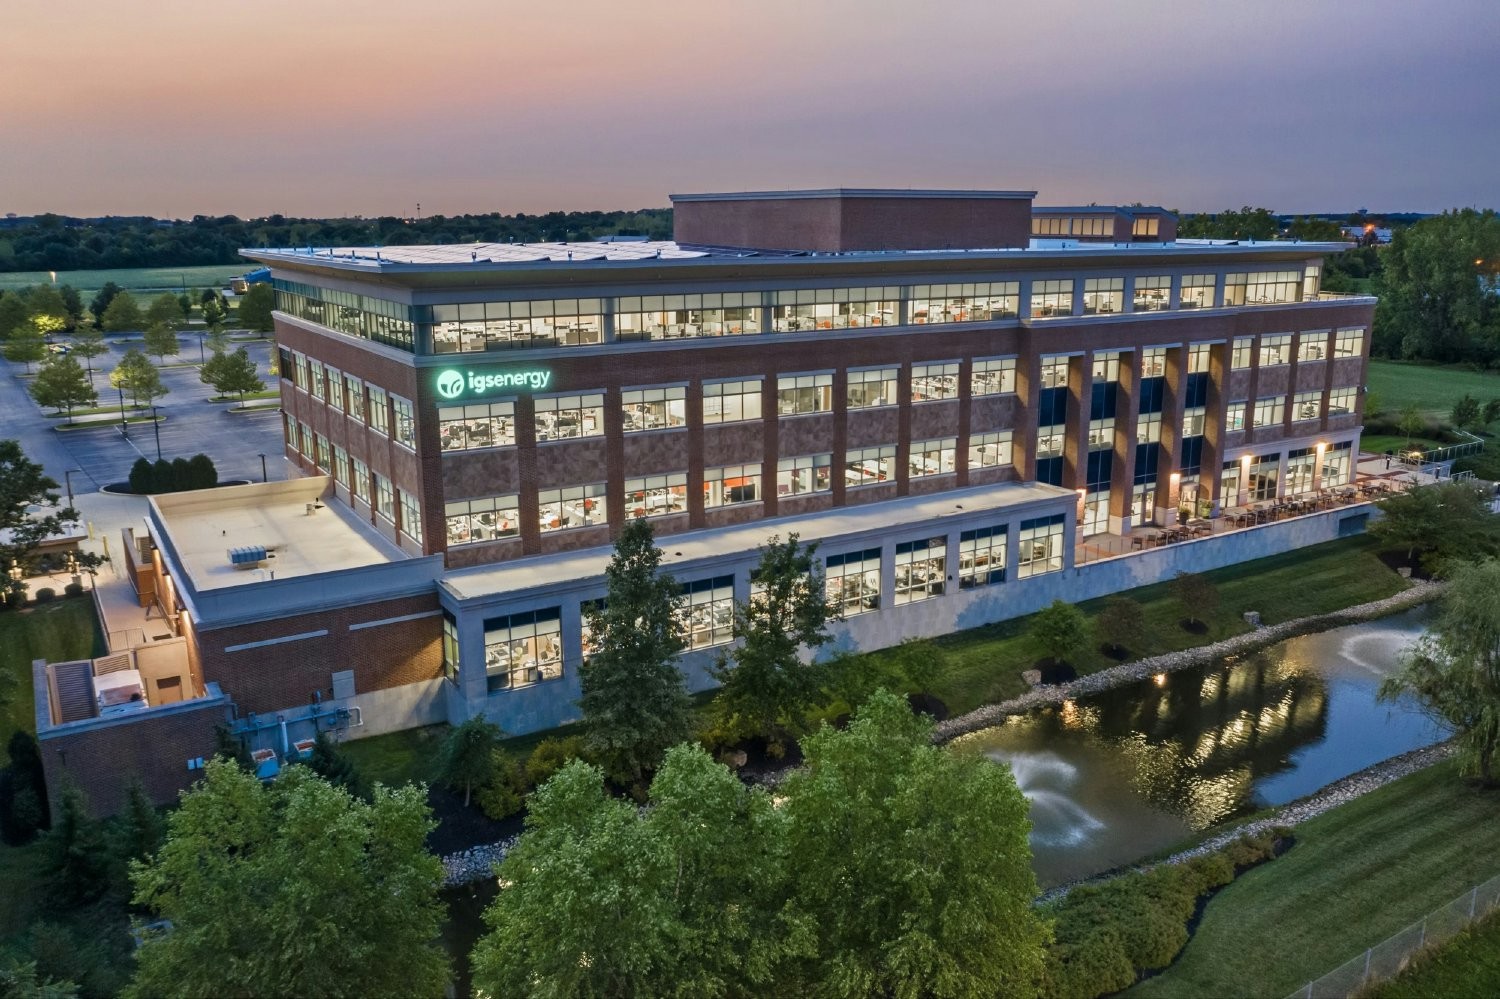 Our Dublin, Ohio, headquarters is a platinum-certified Leadership in Energy and Environmental Design (LEED) building.
